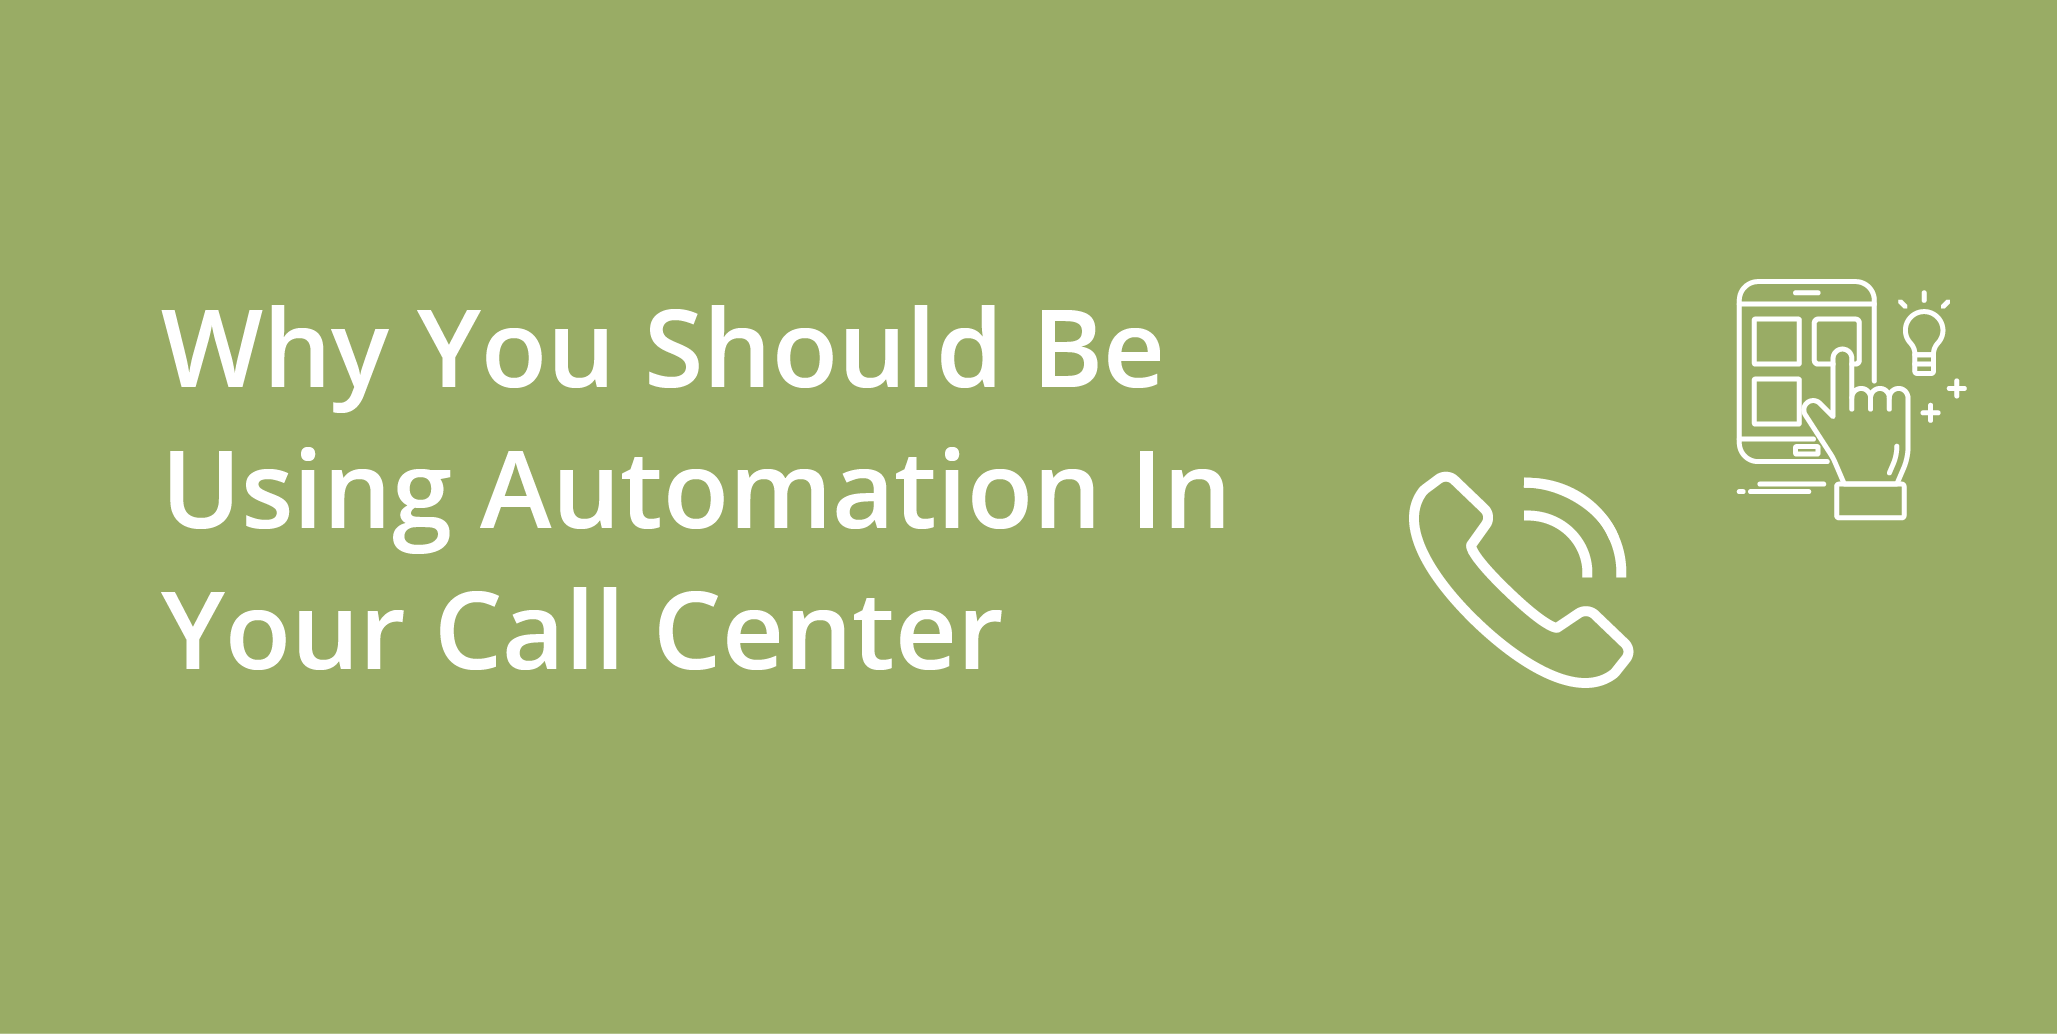 Contact Center Automation Trends: Why You Should Be Using Automation In Your Call Center | Telephones for business